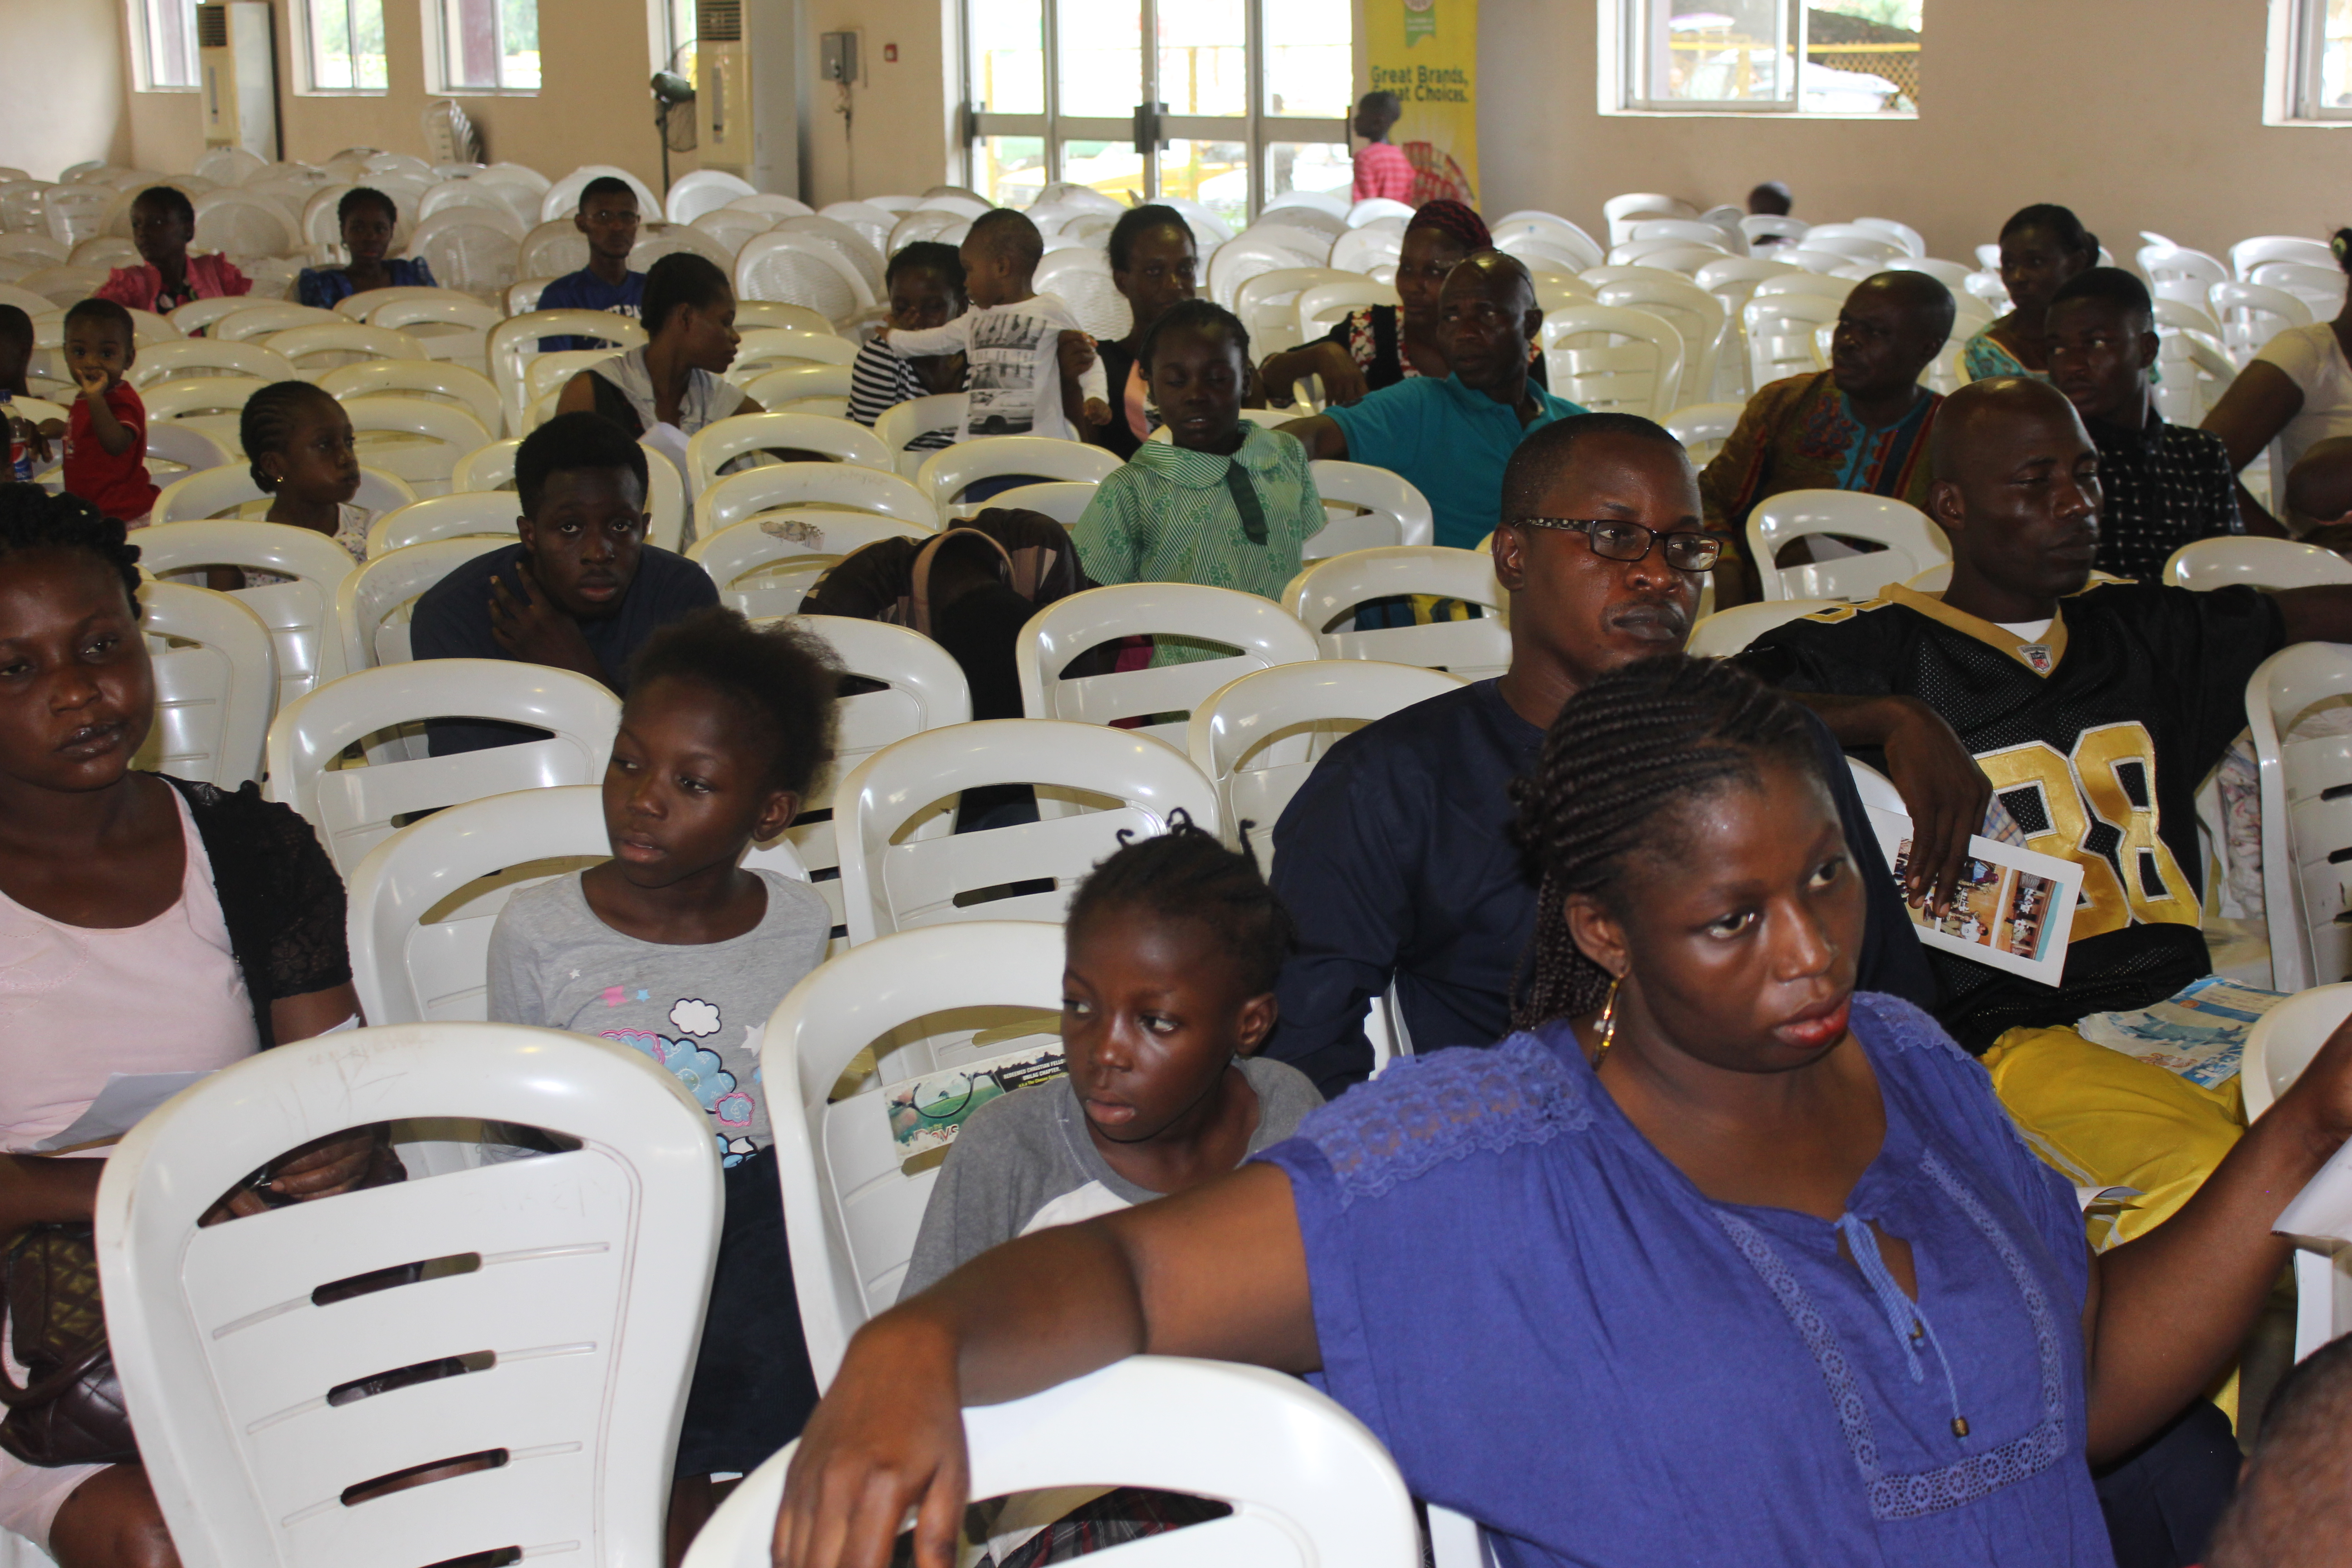 A cross section of participants at the event!